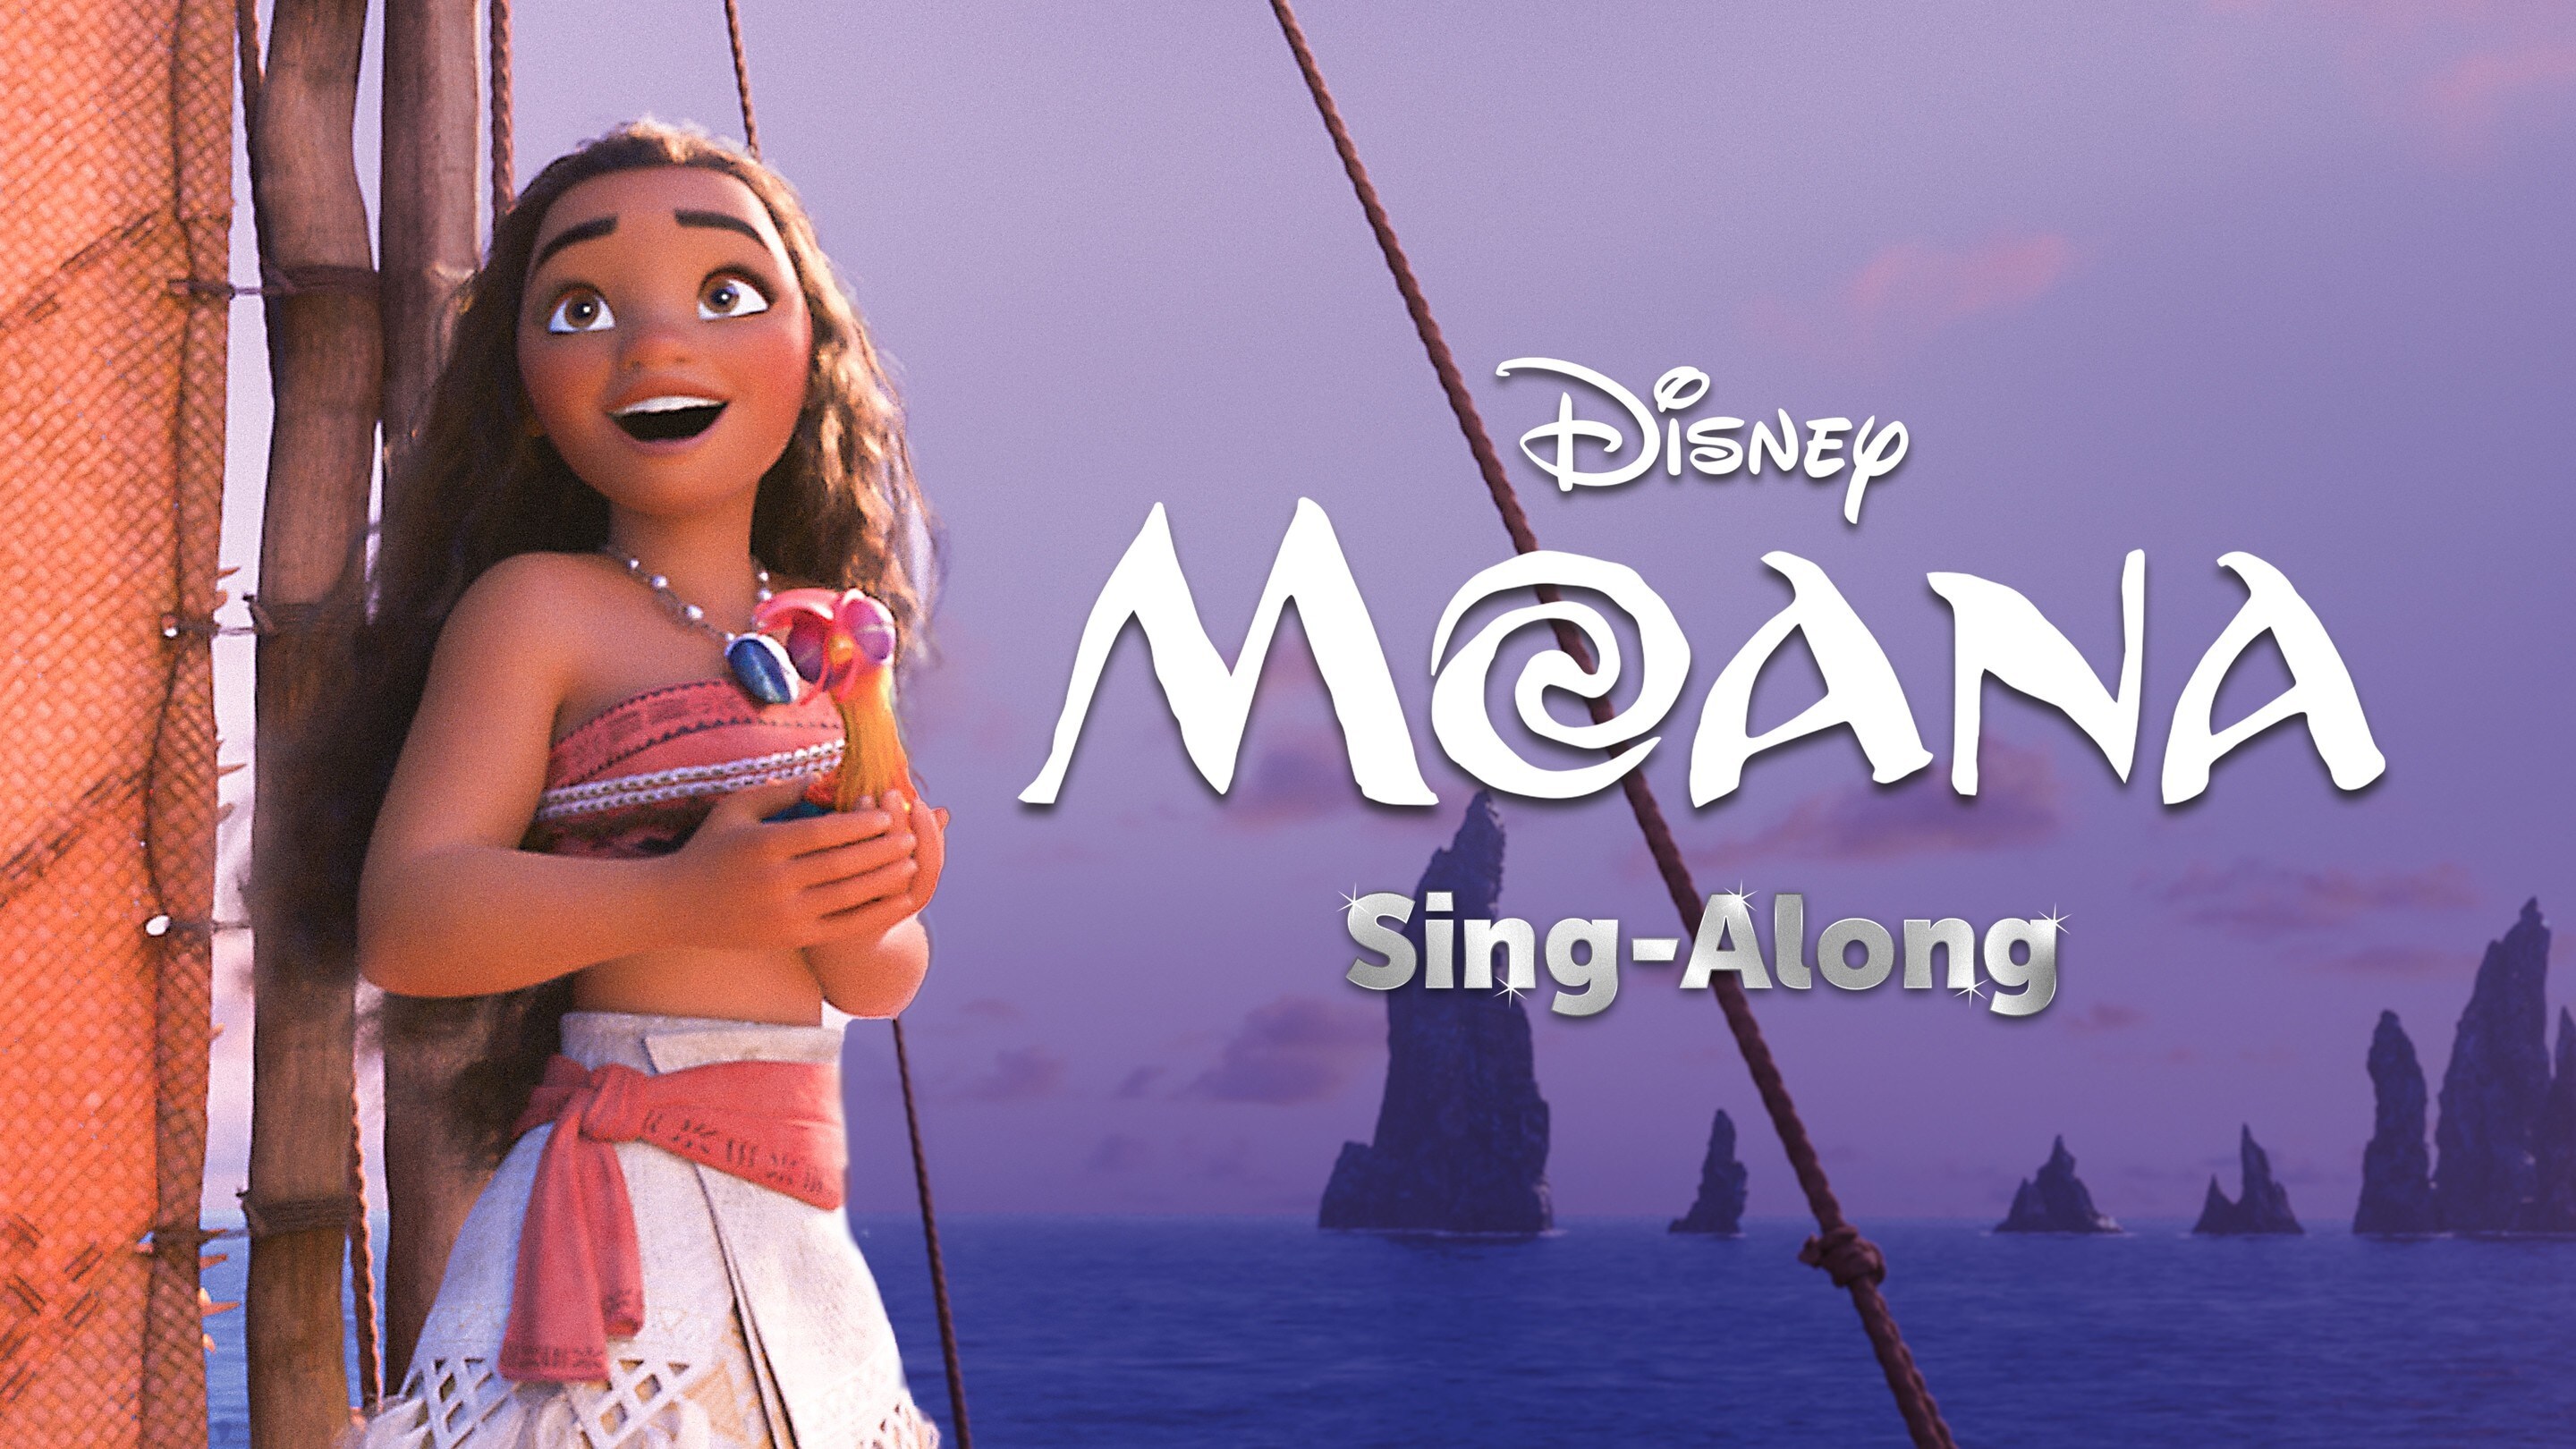 DISNEY+ ANNOUNCES SING-ALONG VERSIONS OF SEVEN DISNEY CLASSICS, INCLUDING  MOANA AND THE LITTLE MERMAID LAUNCHING FRIDAY, 22 JULY | UK Press